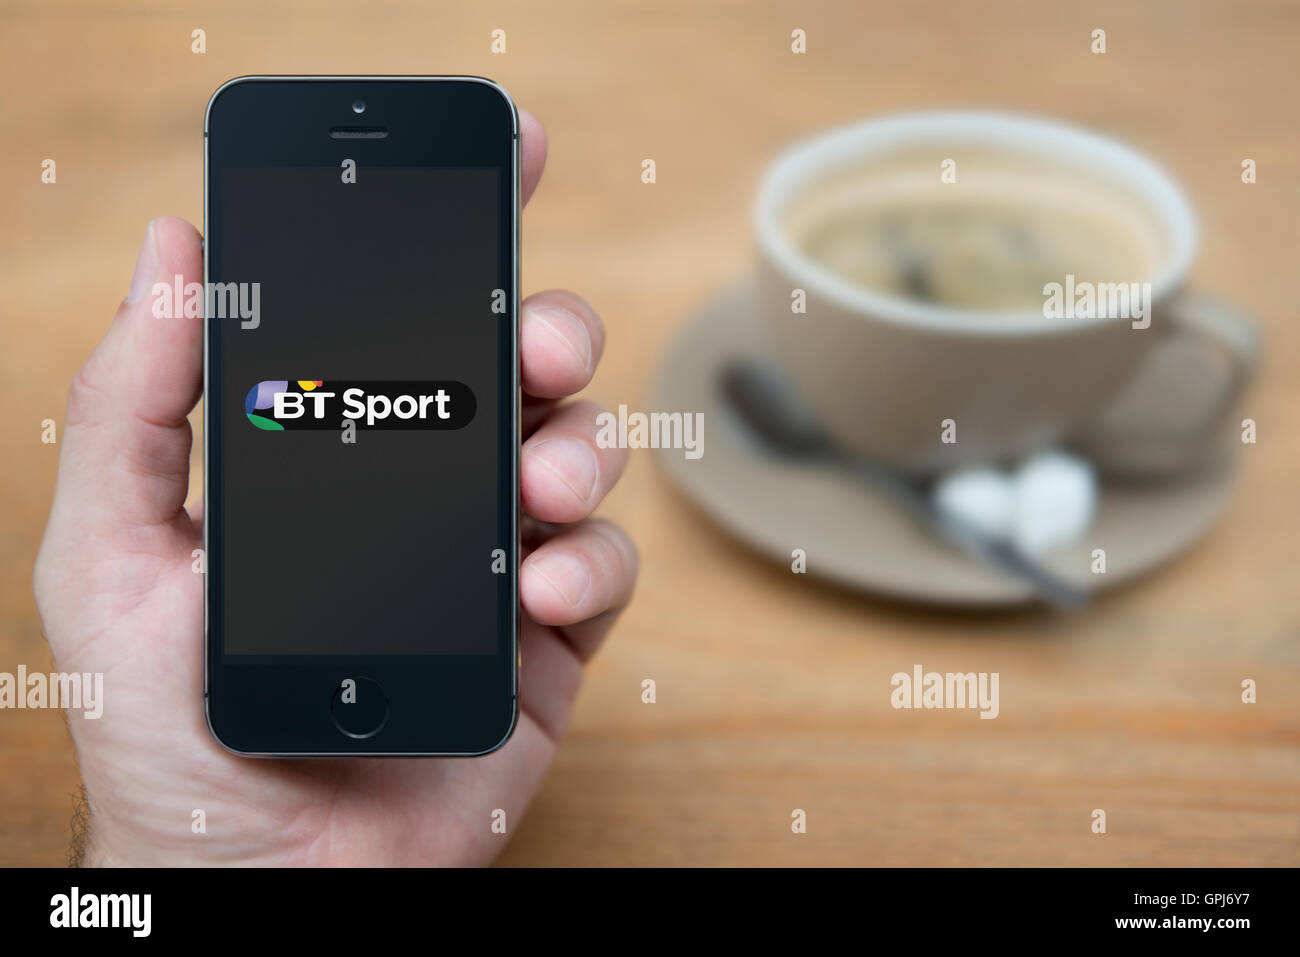 A man looks at his iPhone which displays the BT Sport television station logo, with a cup of coffee (Editorial use only). Stock Photo